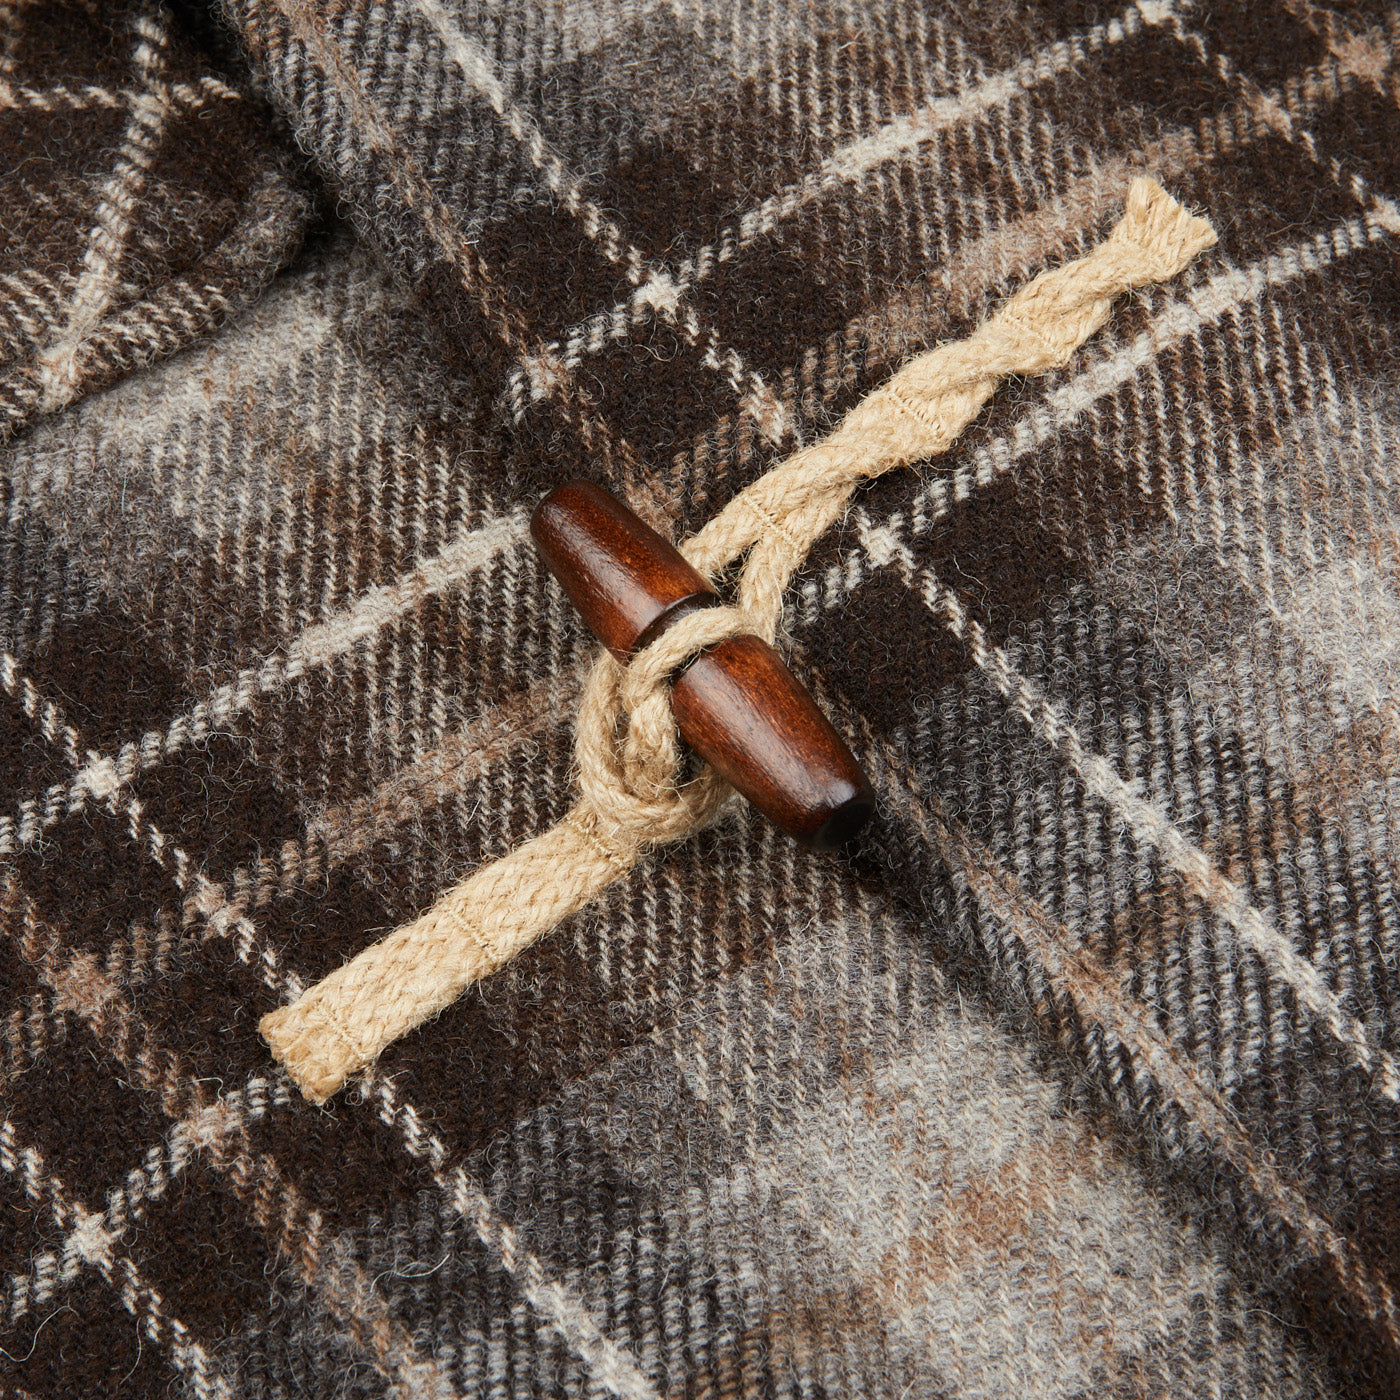 A close up of a Brown Undyed Shepherds Check Wool Duffle Coat by De Bonne Facture, with a wooden tassel, featuring collaboration and wool.